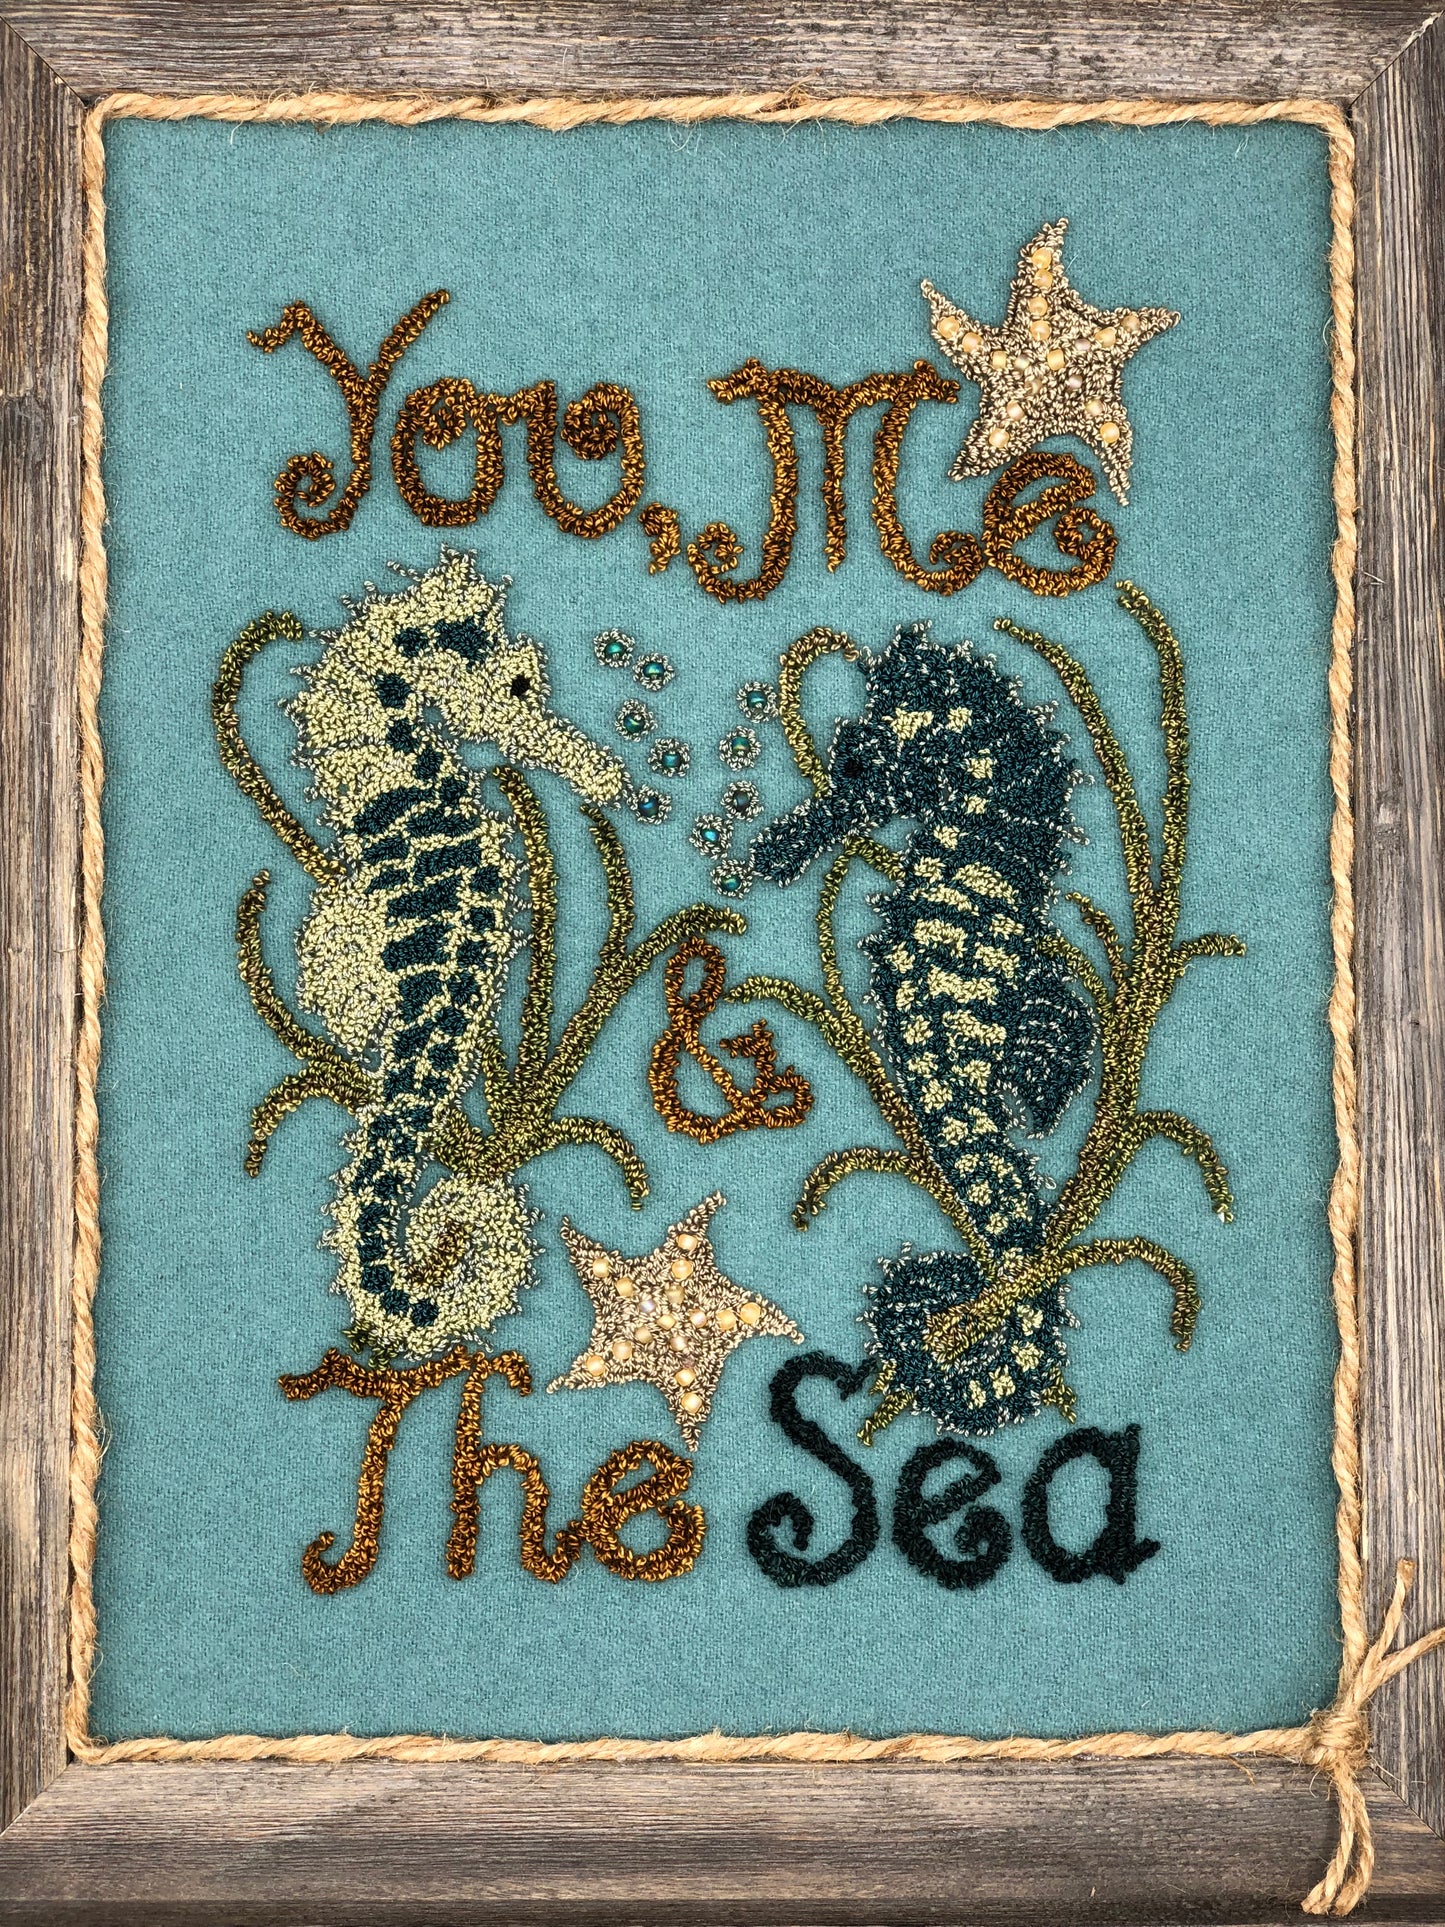 You, Me & The Sea- PDF Digital Download Punch Needle Pattern by Orphaned Wool. This wonderful under the sea pattern was created using wool fabric as the background fused with the weaver's cloth pattern. Small beads were also used to create the bubble effects.